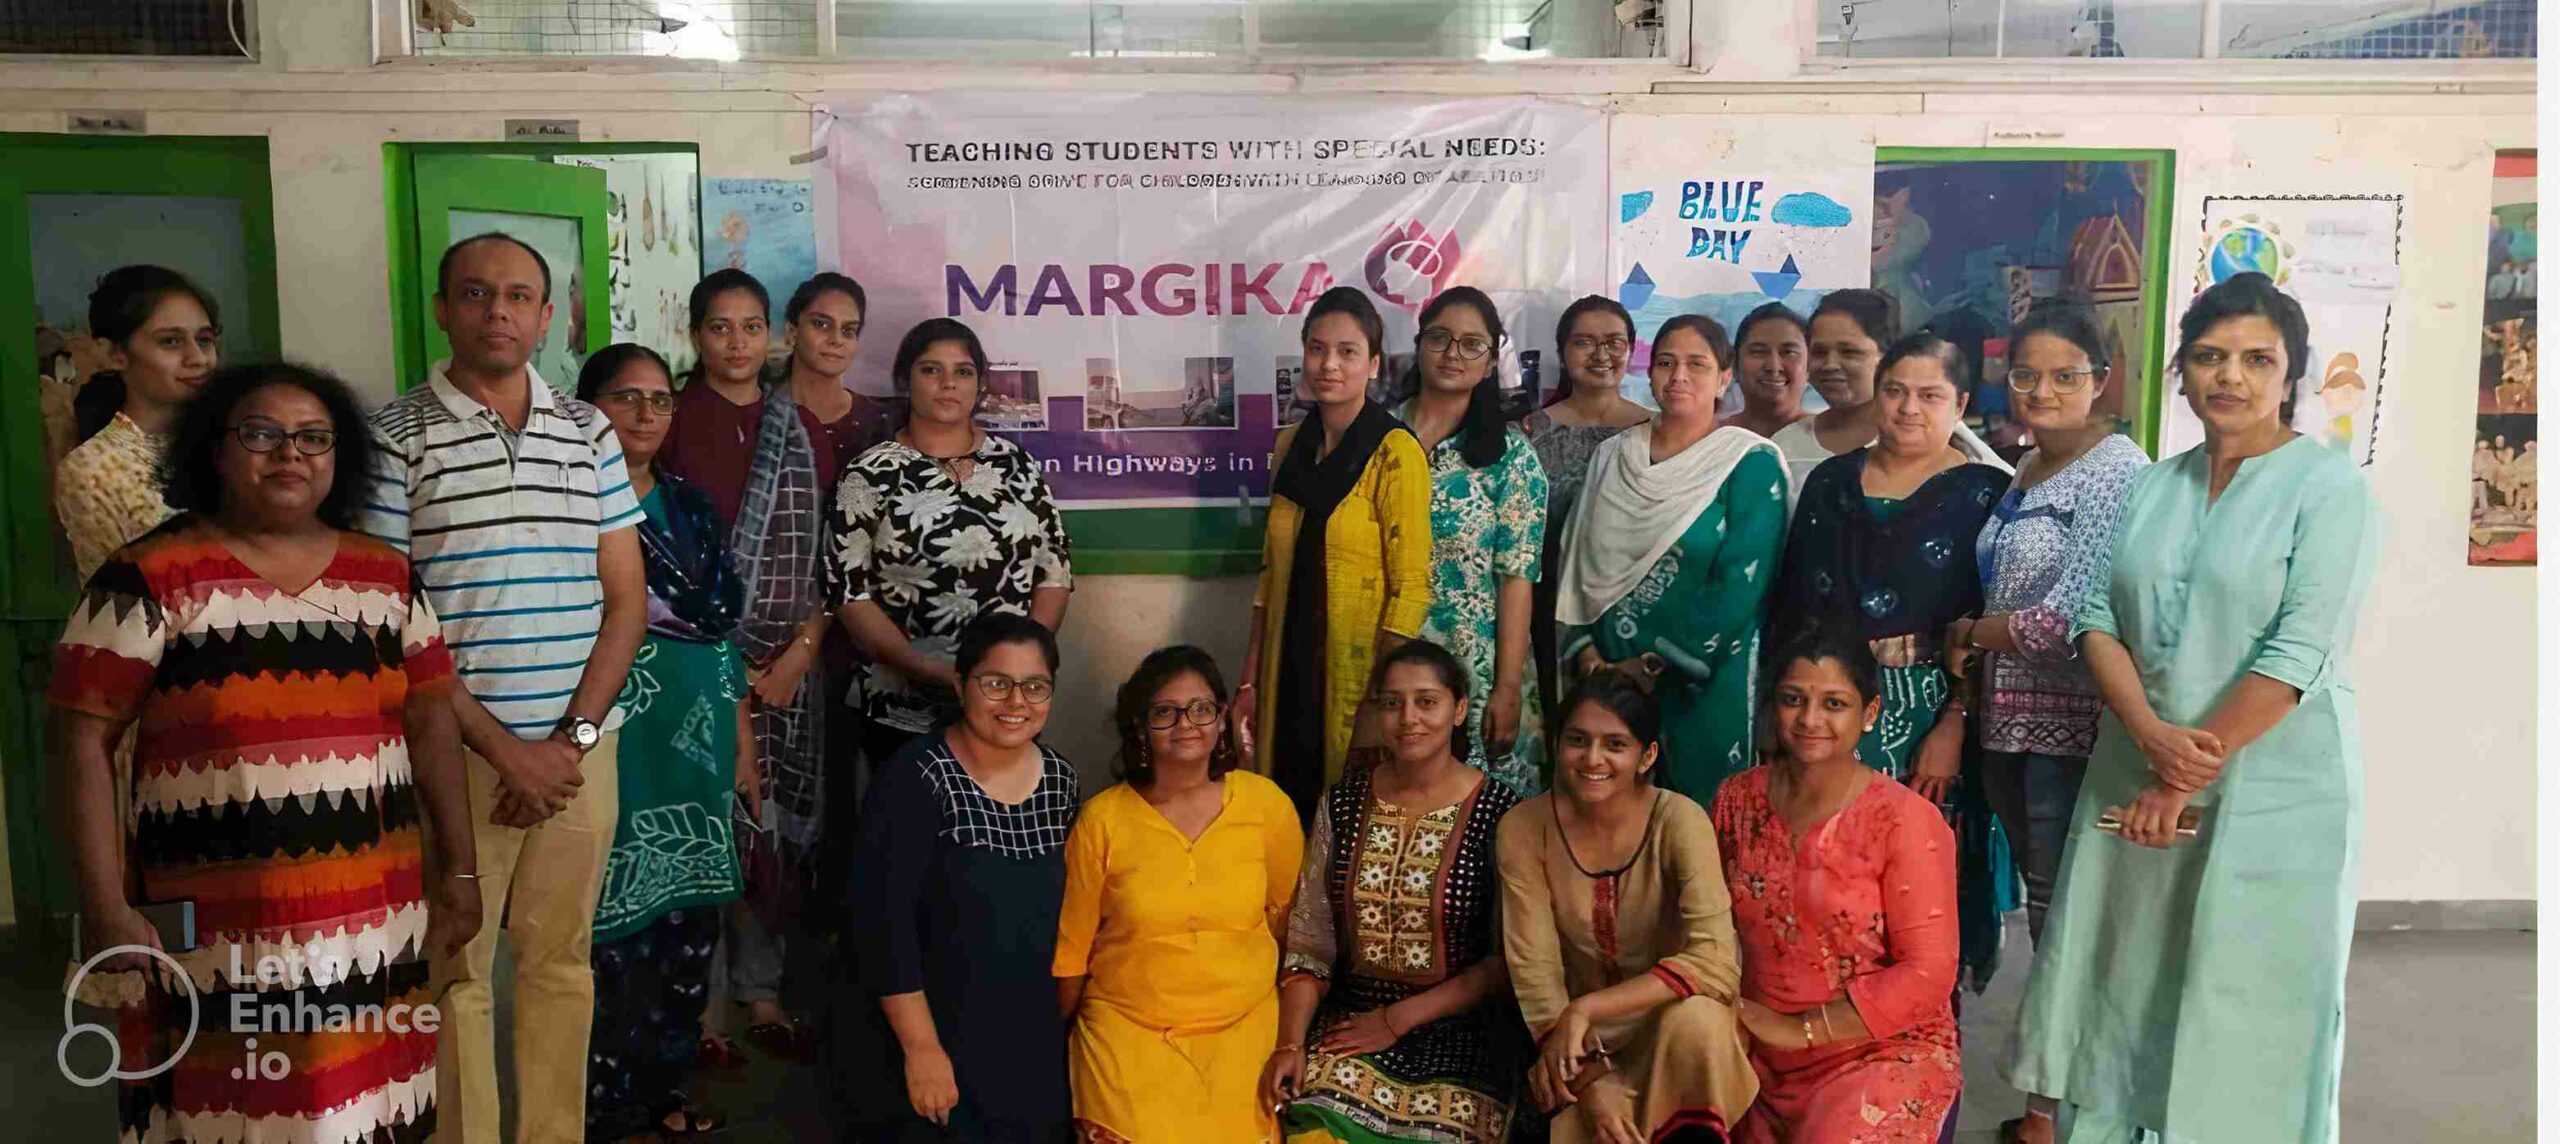 The Margika Foundation trains caregivers, and conducts capacity building workshops to instill empathy.